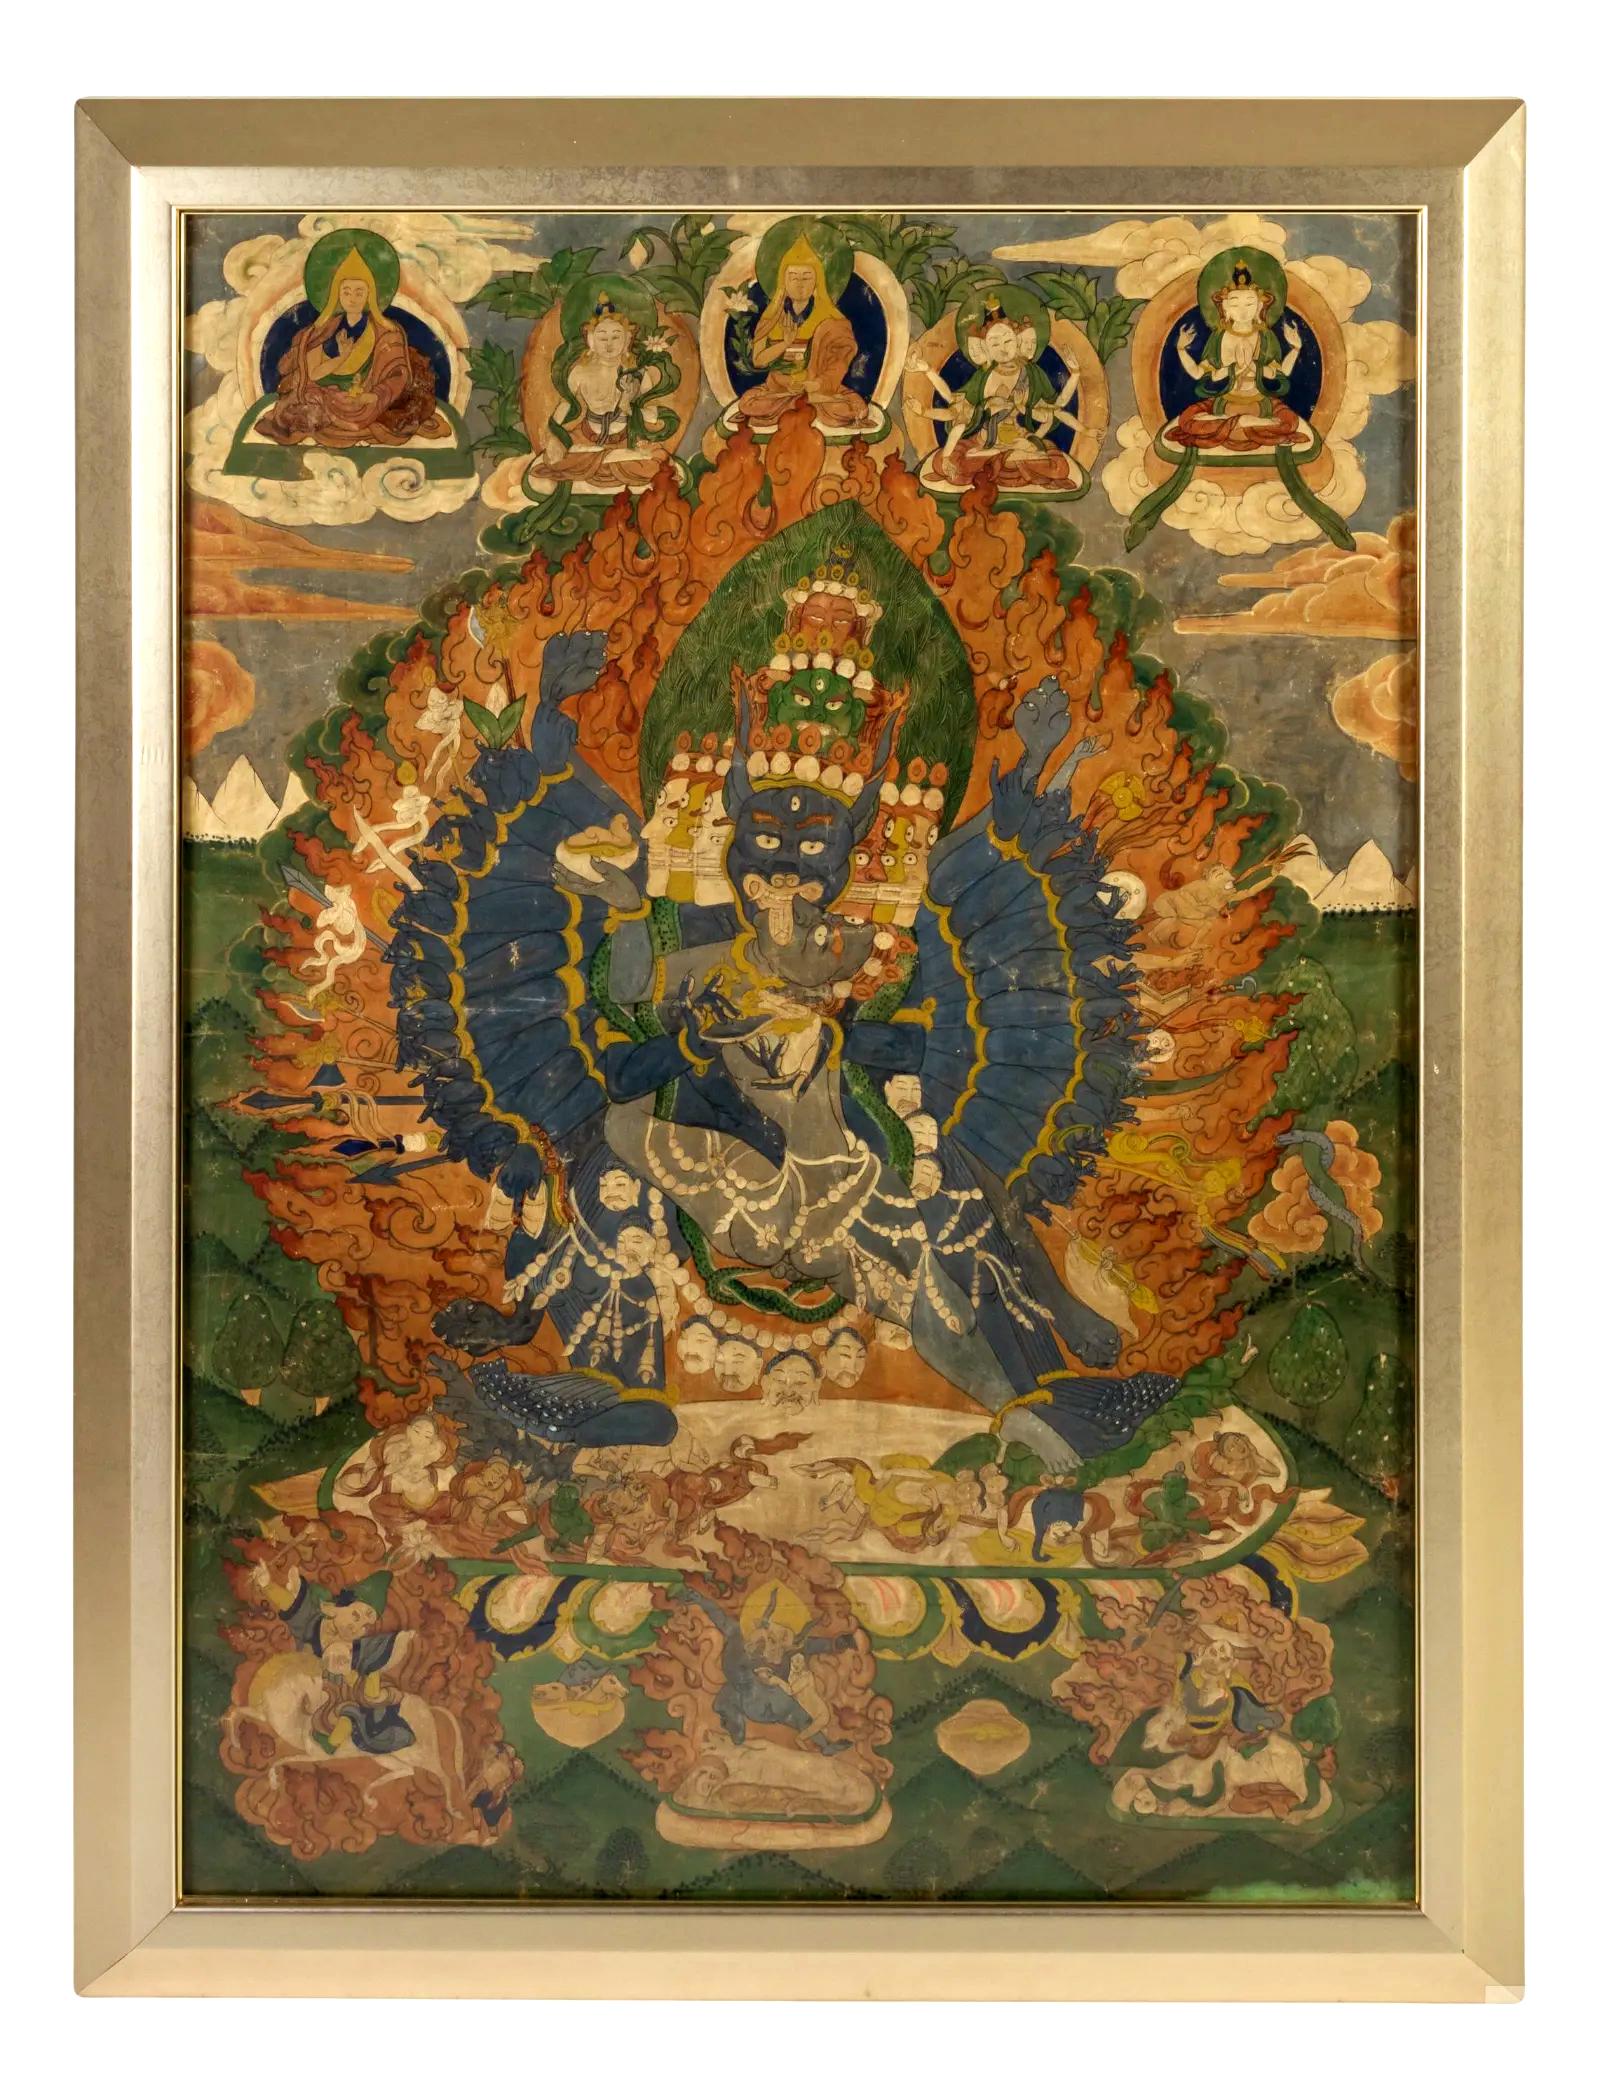 An antique Tibetan Thangka with polychrome pigments on cloth, circa mid to late 19th century. It depicts Yamantaka, also known as Vajrabhairava, who is a wrathful manifestation of Manjusri, the bodhisattva of wisdom, and in other contexts he also